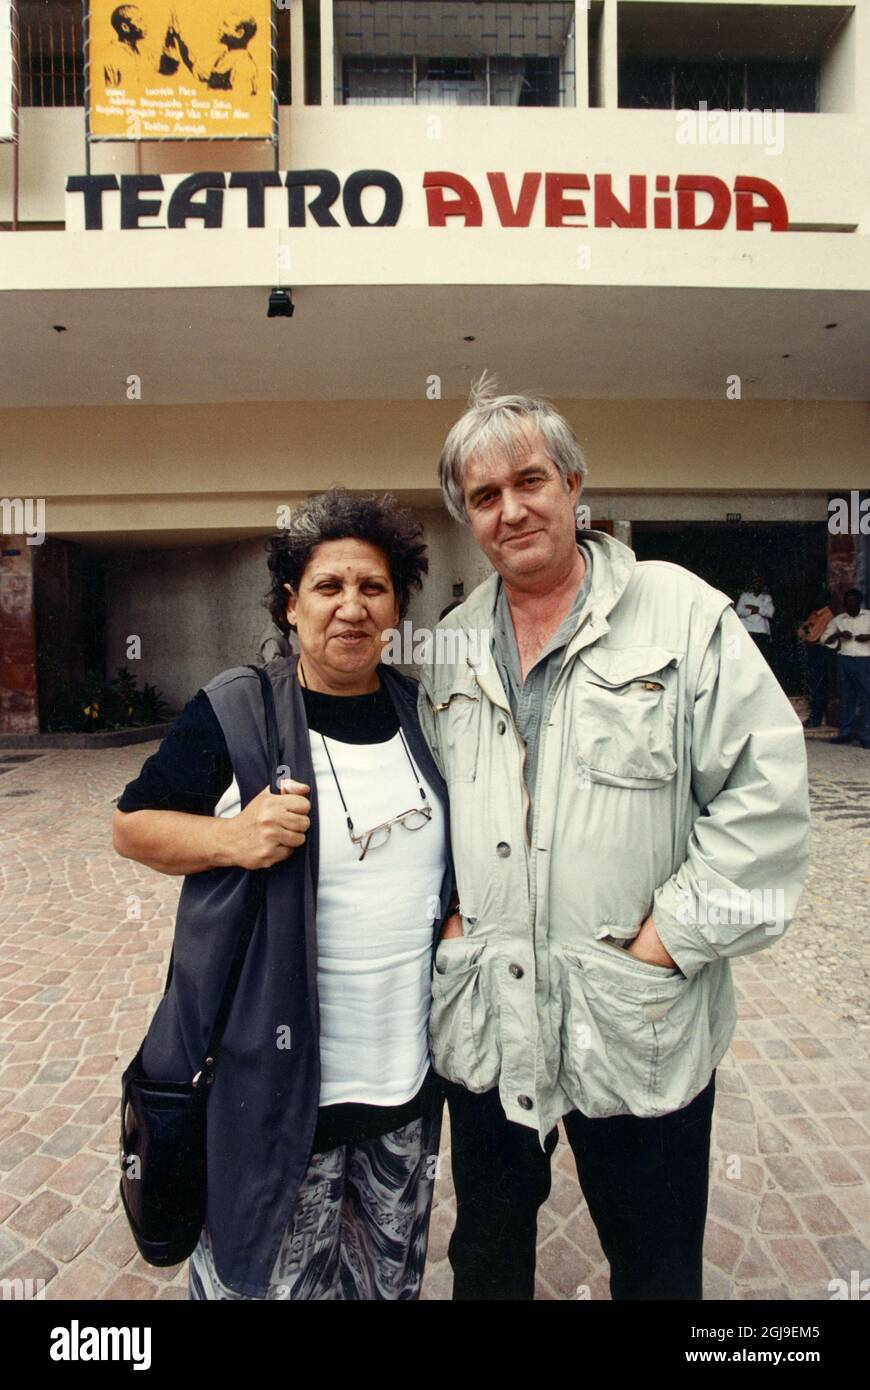 MAPUTO 1998-11-07 Writer Henning Mankell is seen together with Manuela Soeiro outside the Teatro Avenida i Maputo, Mozambique, November 7, 1998. Mankell was the artistic counselor and Soeiro was the artistic leader of the theatre. Henning Mankell died Monday. Henning Mankell was a Swedish crime writer, political activist and dramatist, best known for a series of crime novels starring his most famous creation, Inspector Kurt Wallander. Wallander has been filmed both with Swedish actor Krister Henriksson and British actor Kenneth Branagh in the leading roles. Mankell was 67. Foto: Jonas Ekstrom Stock Photo